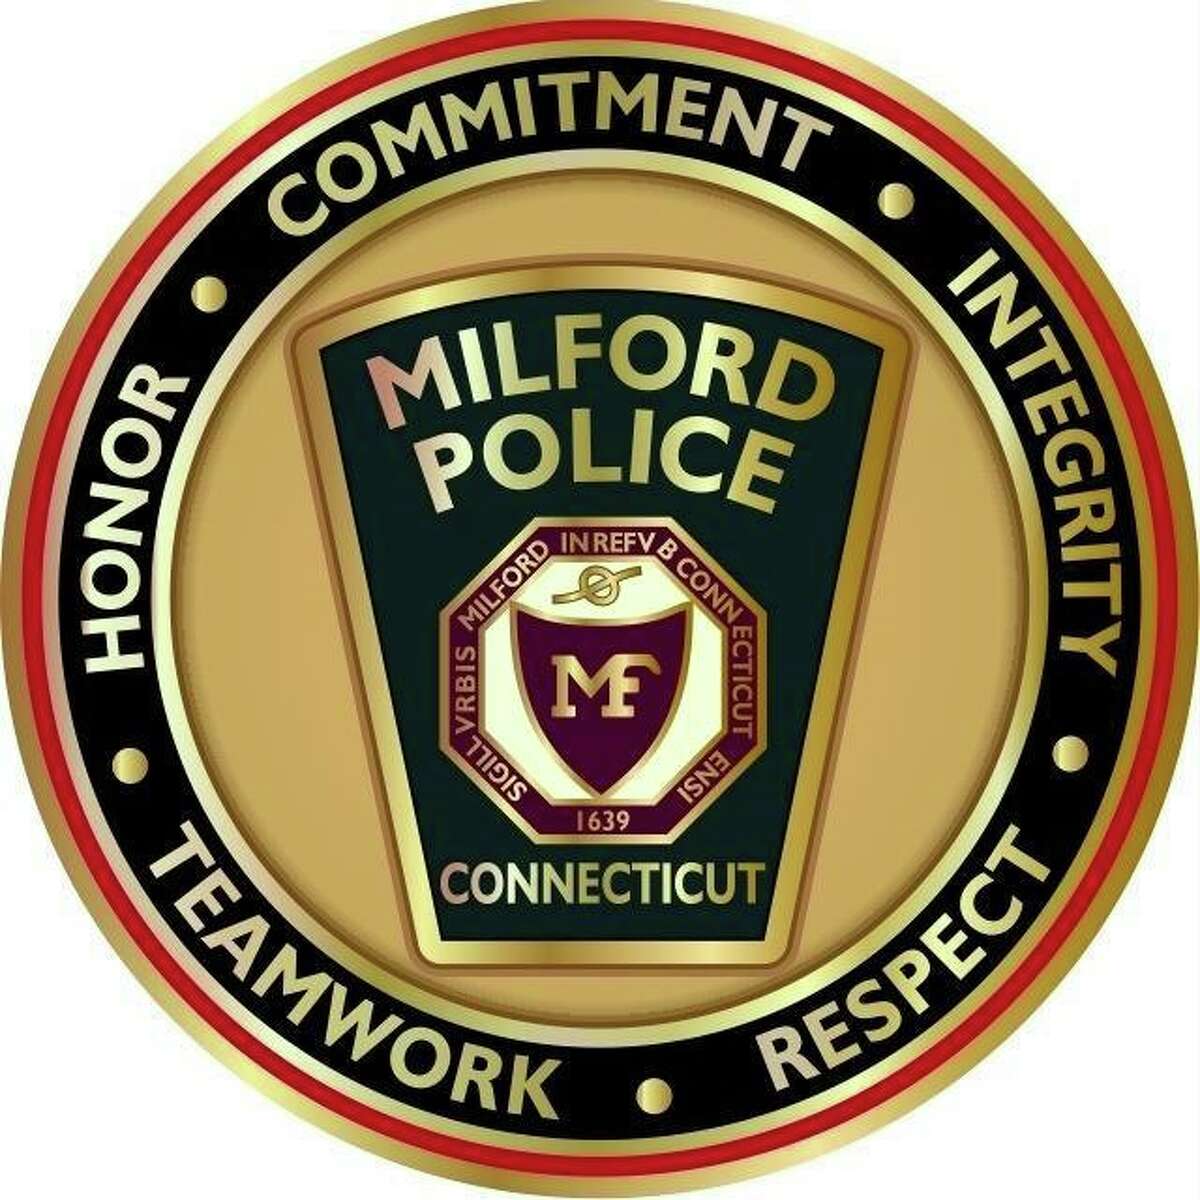 A logo for the Milford Police Department.